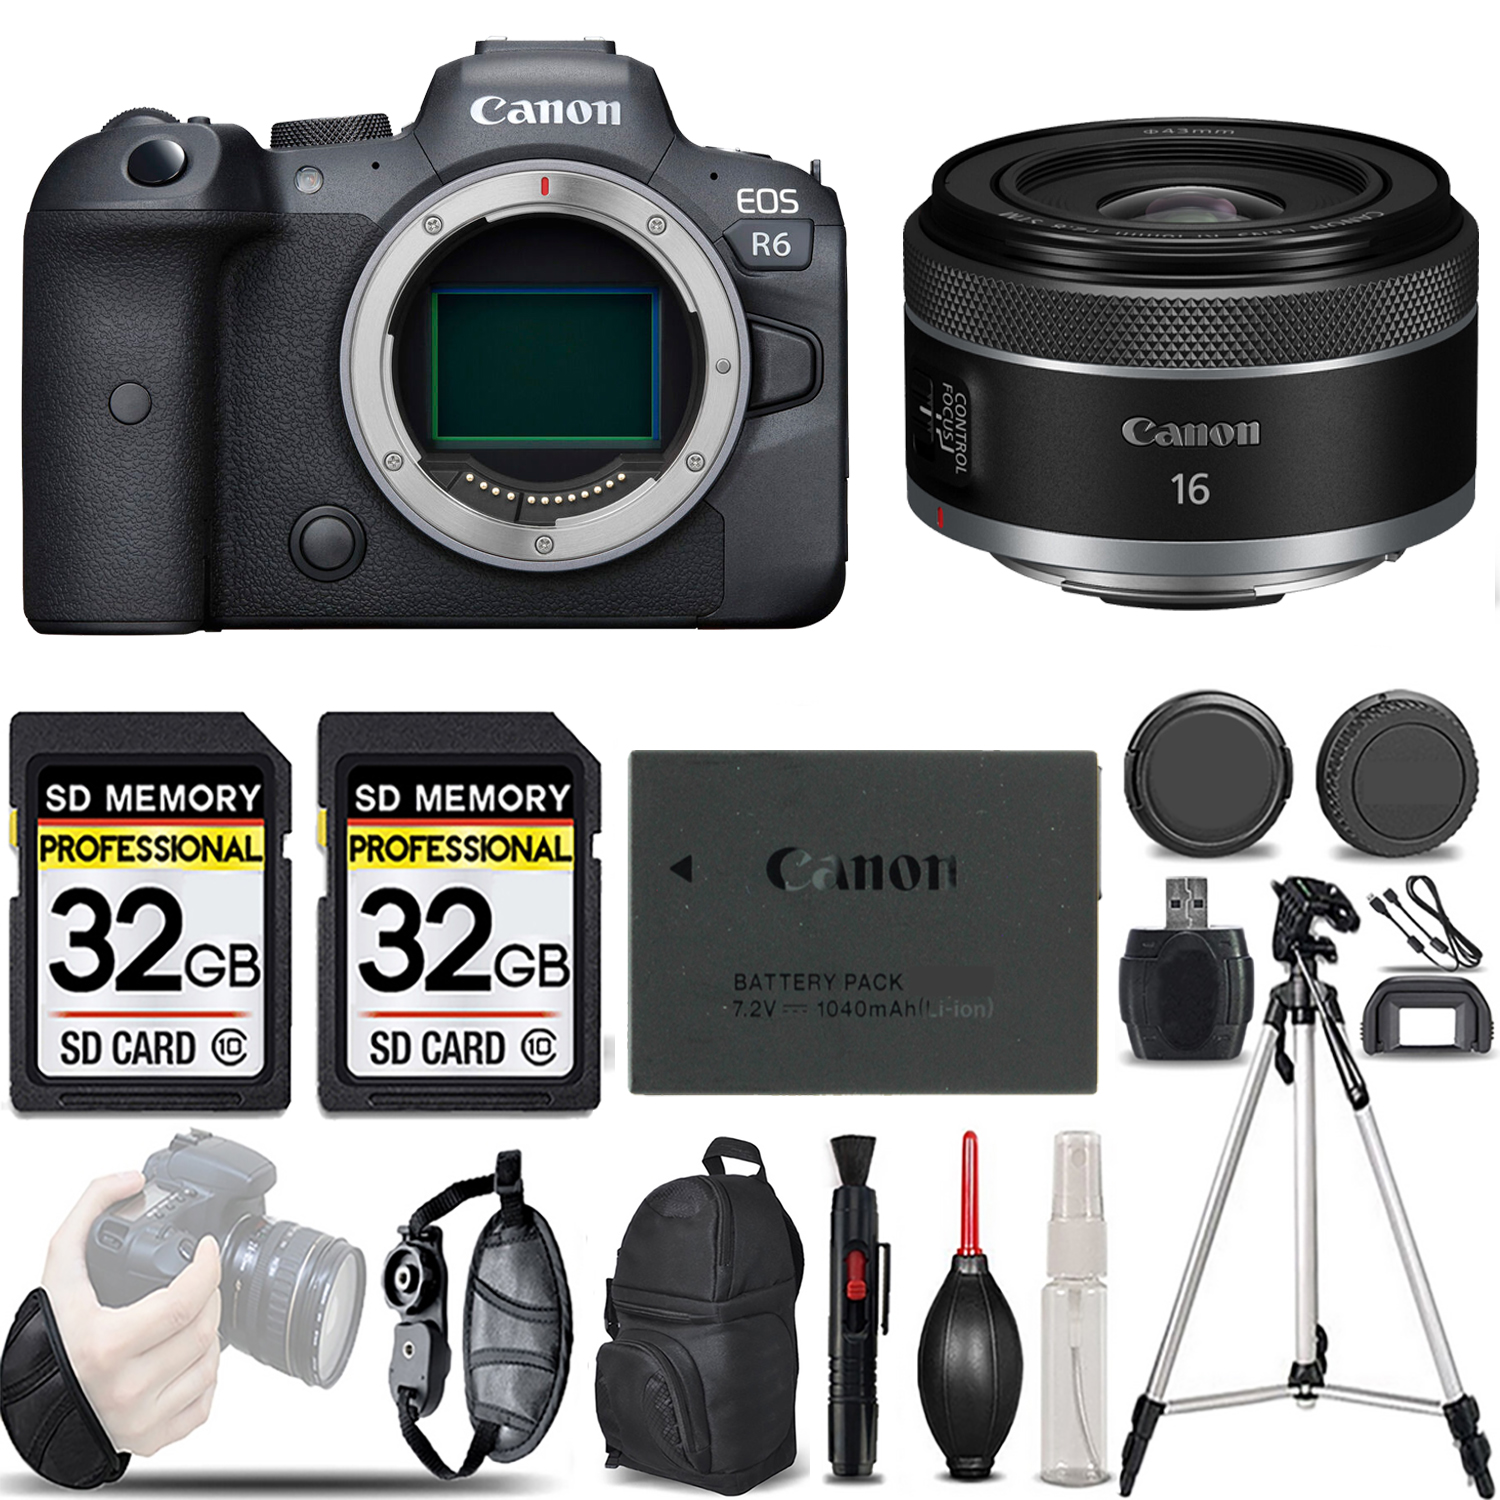 EOS R6 Mirrorless Camera + 16mm f/2.8 STM Lens - LOADED KIT *FREE SHIPPING*